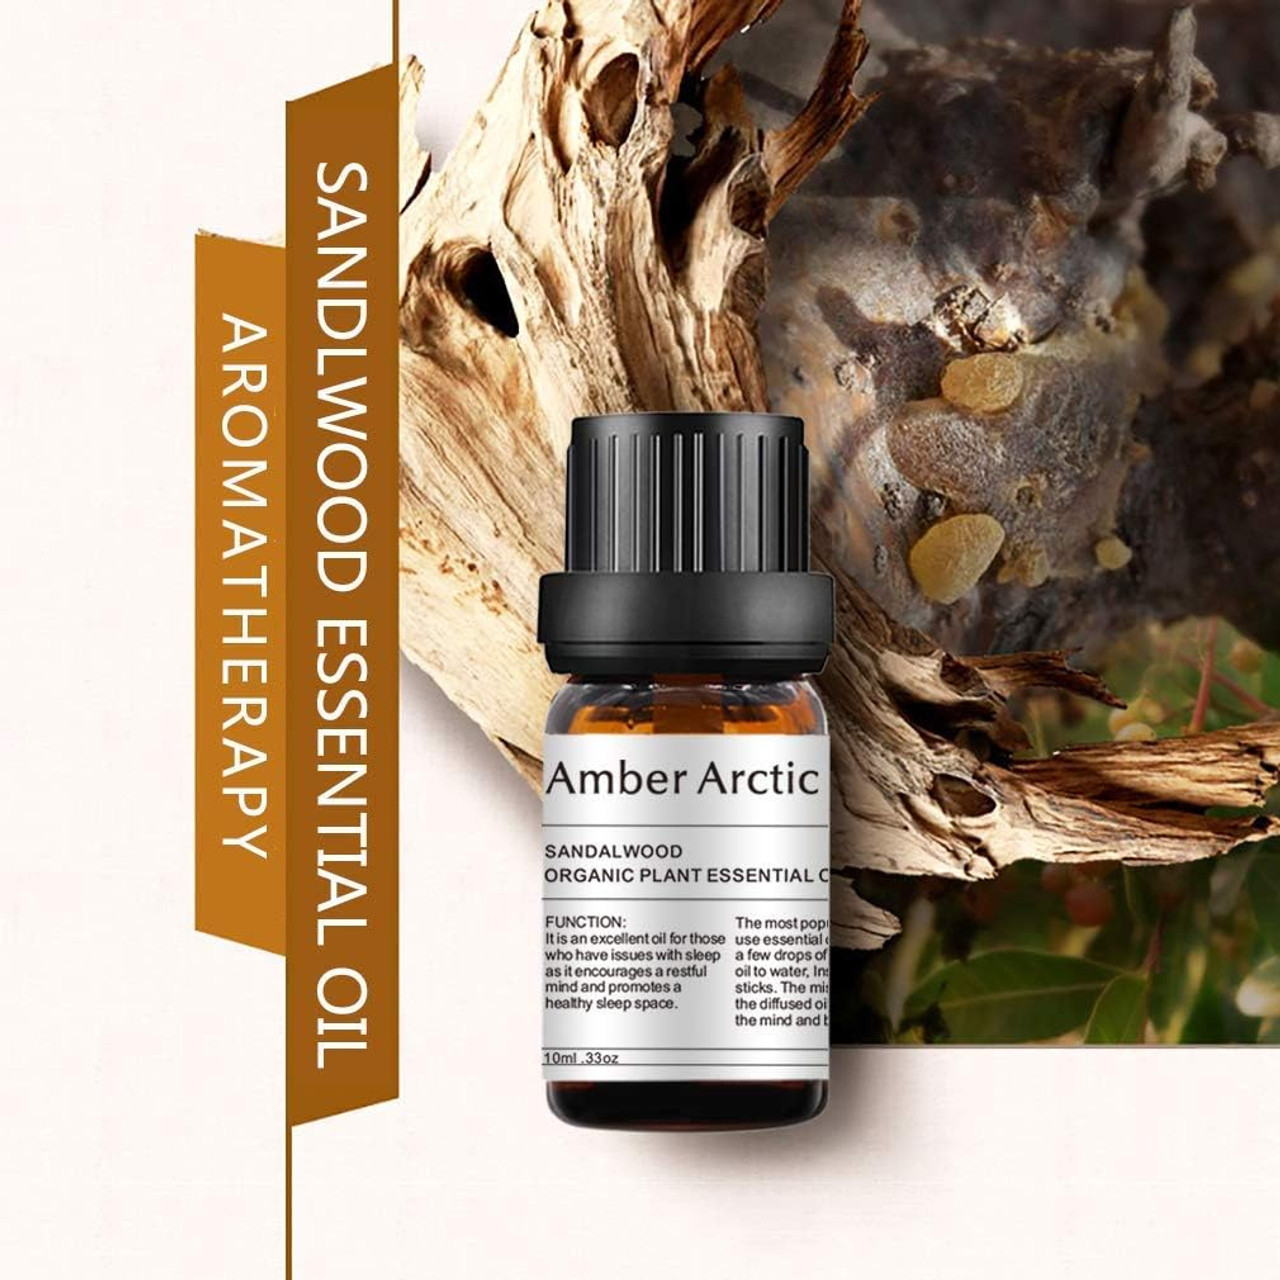  RAINBOW ABBY Sandalwood Essential Oil 100% Pure Premium Grade  Aromatherapy Oil for Diffuser, SPA, Perfumes, Massage, Skin Care, Soaps,  Candles - 10ml : Health & Household